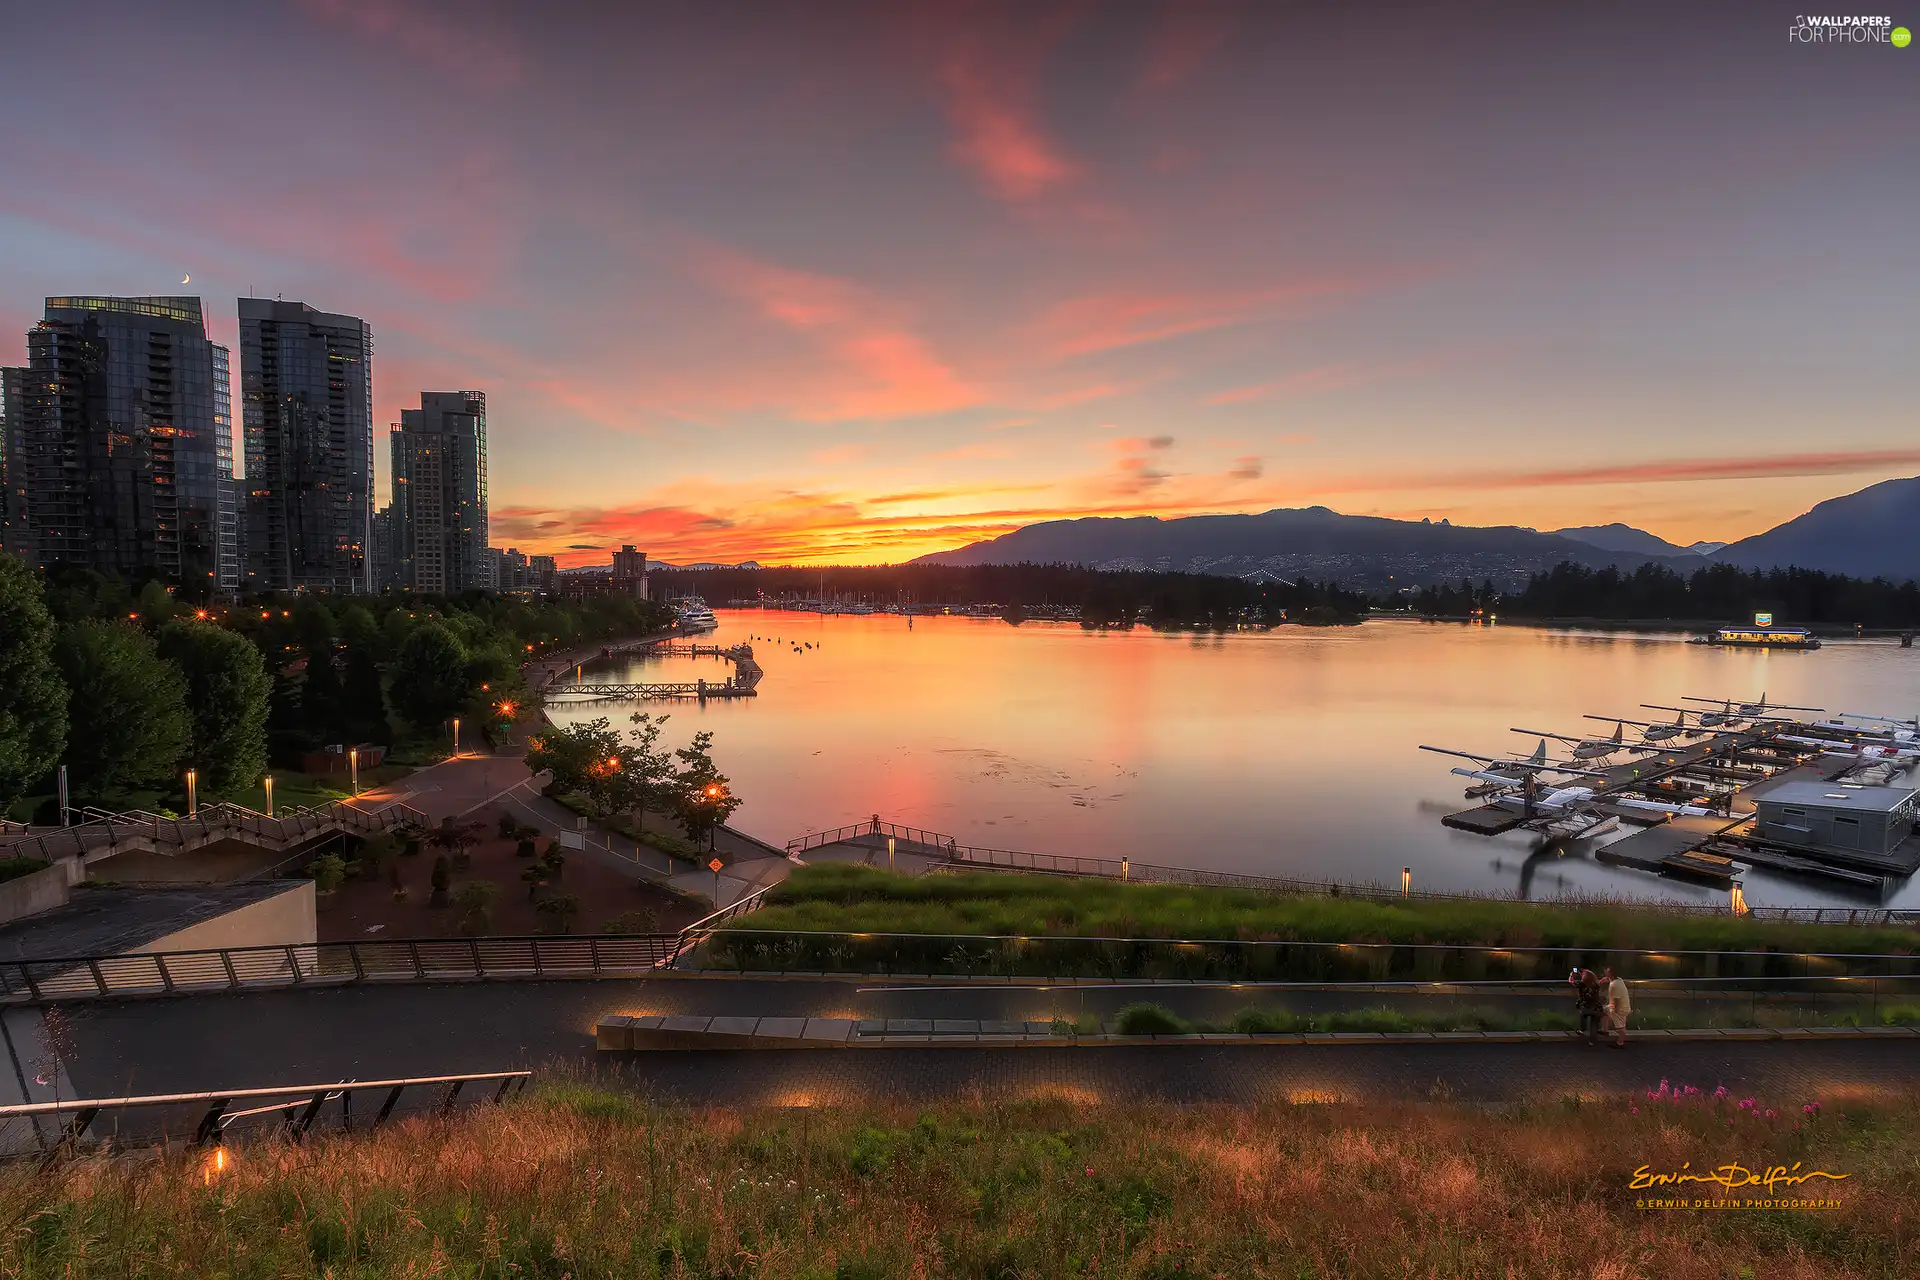 Harbour, Gulf, Coal Harbour, viewes, trees, Vancouver, clouds, Sailboats, Canada, Sunrise, Mountains, skyscrapers